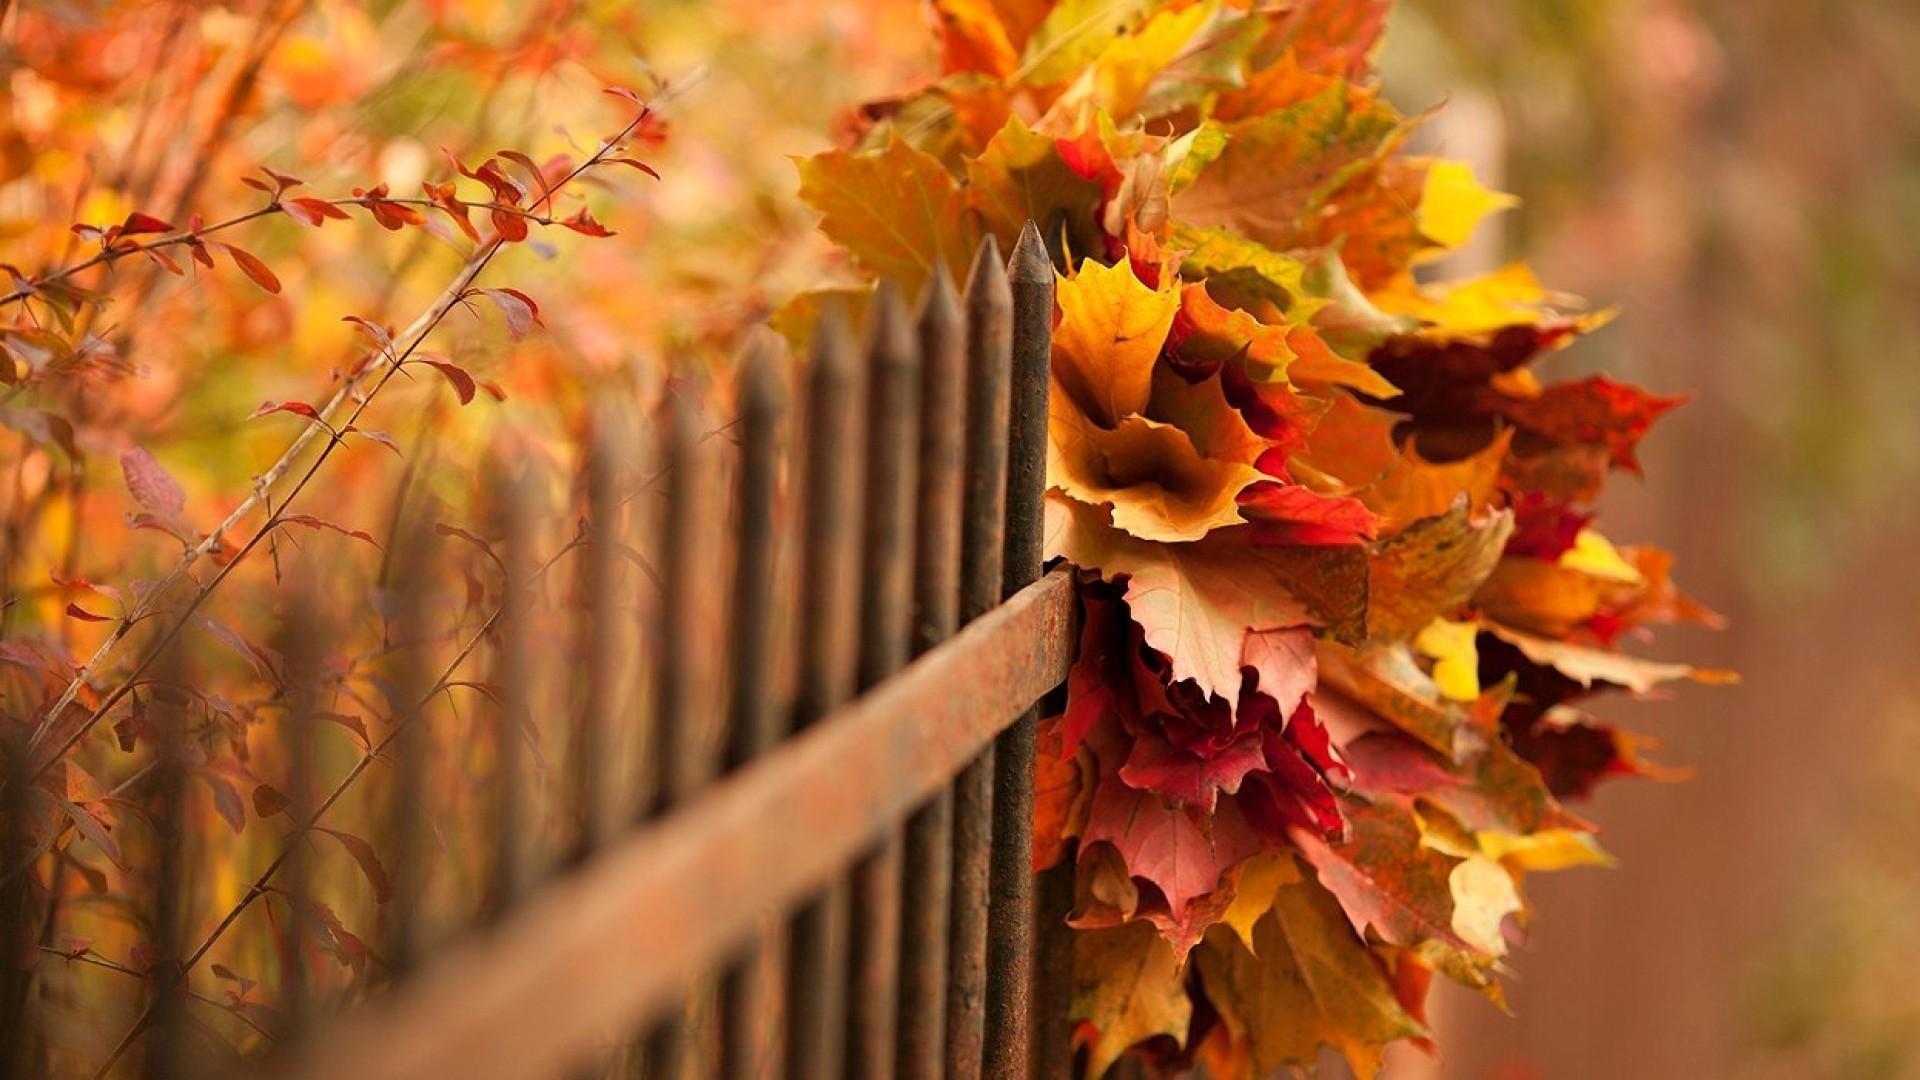 Bouquet of autumn leaves in the fence wallpaper and image